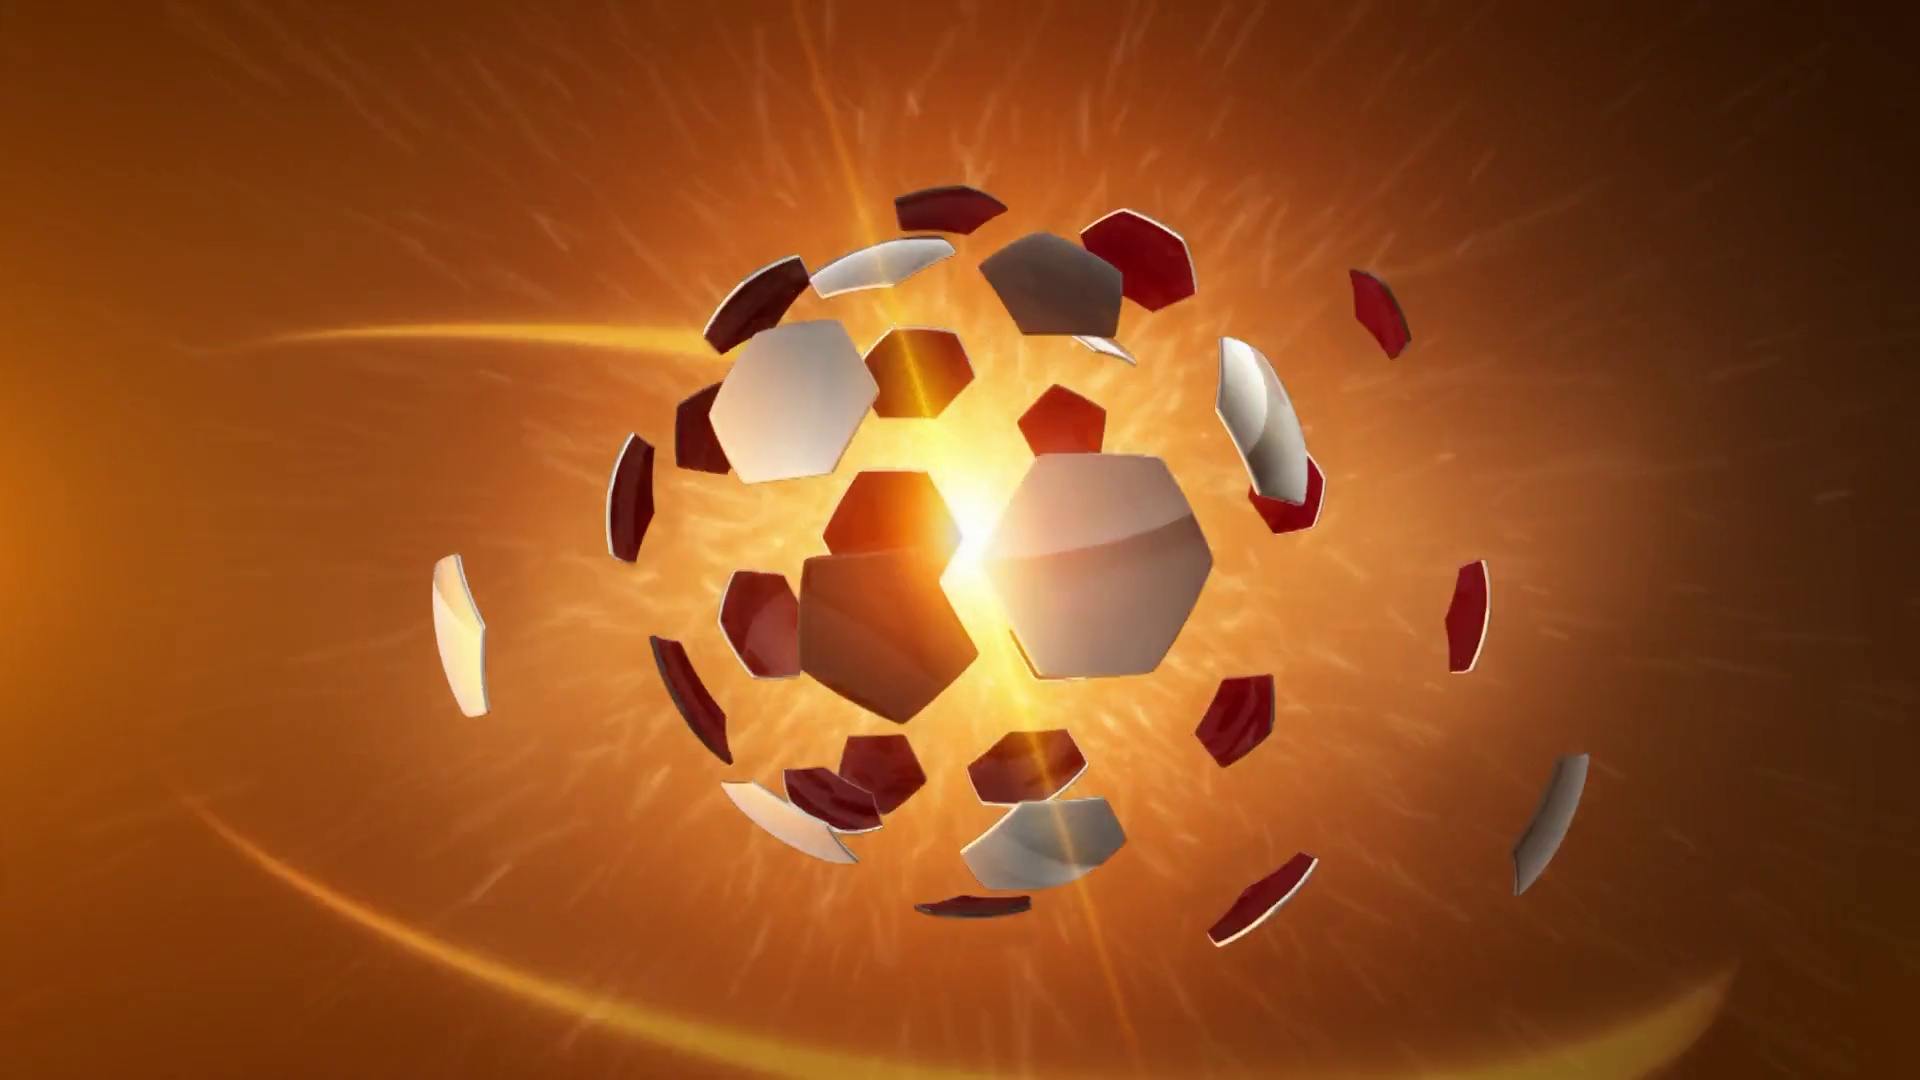 10 Top Football (Soccer) Templates for Adobe After Effects